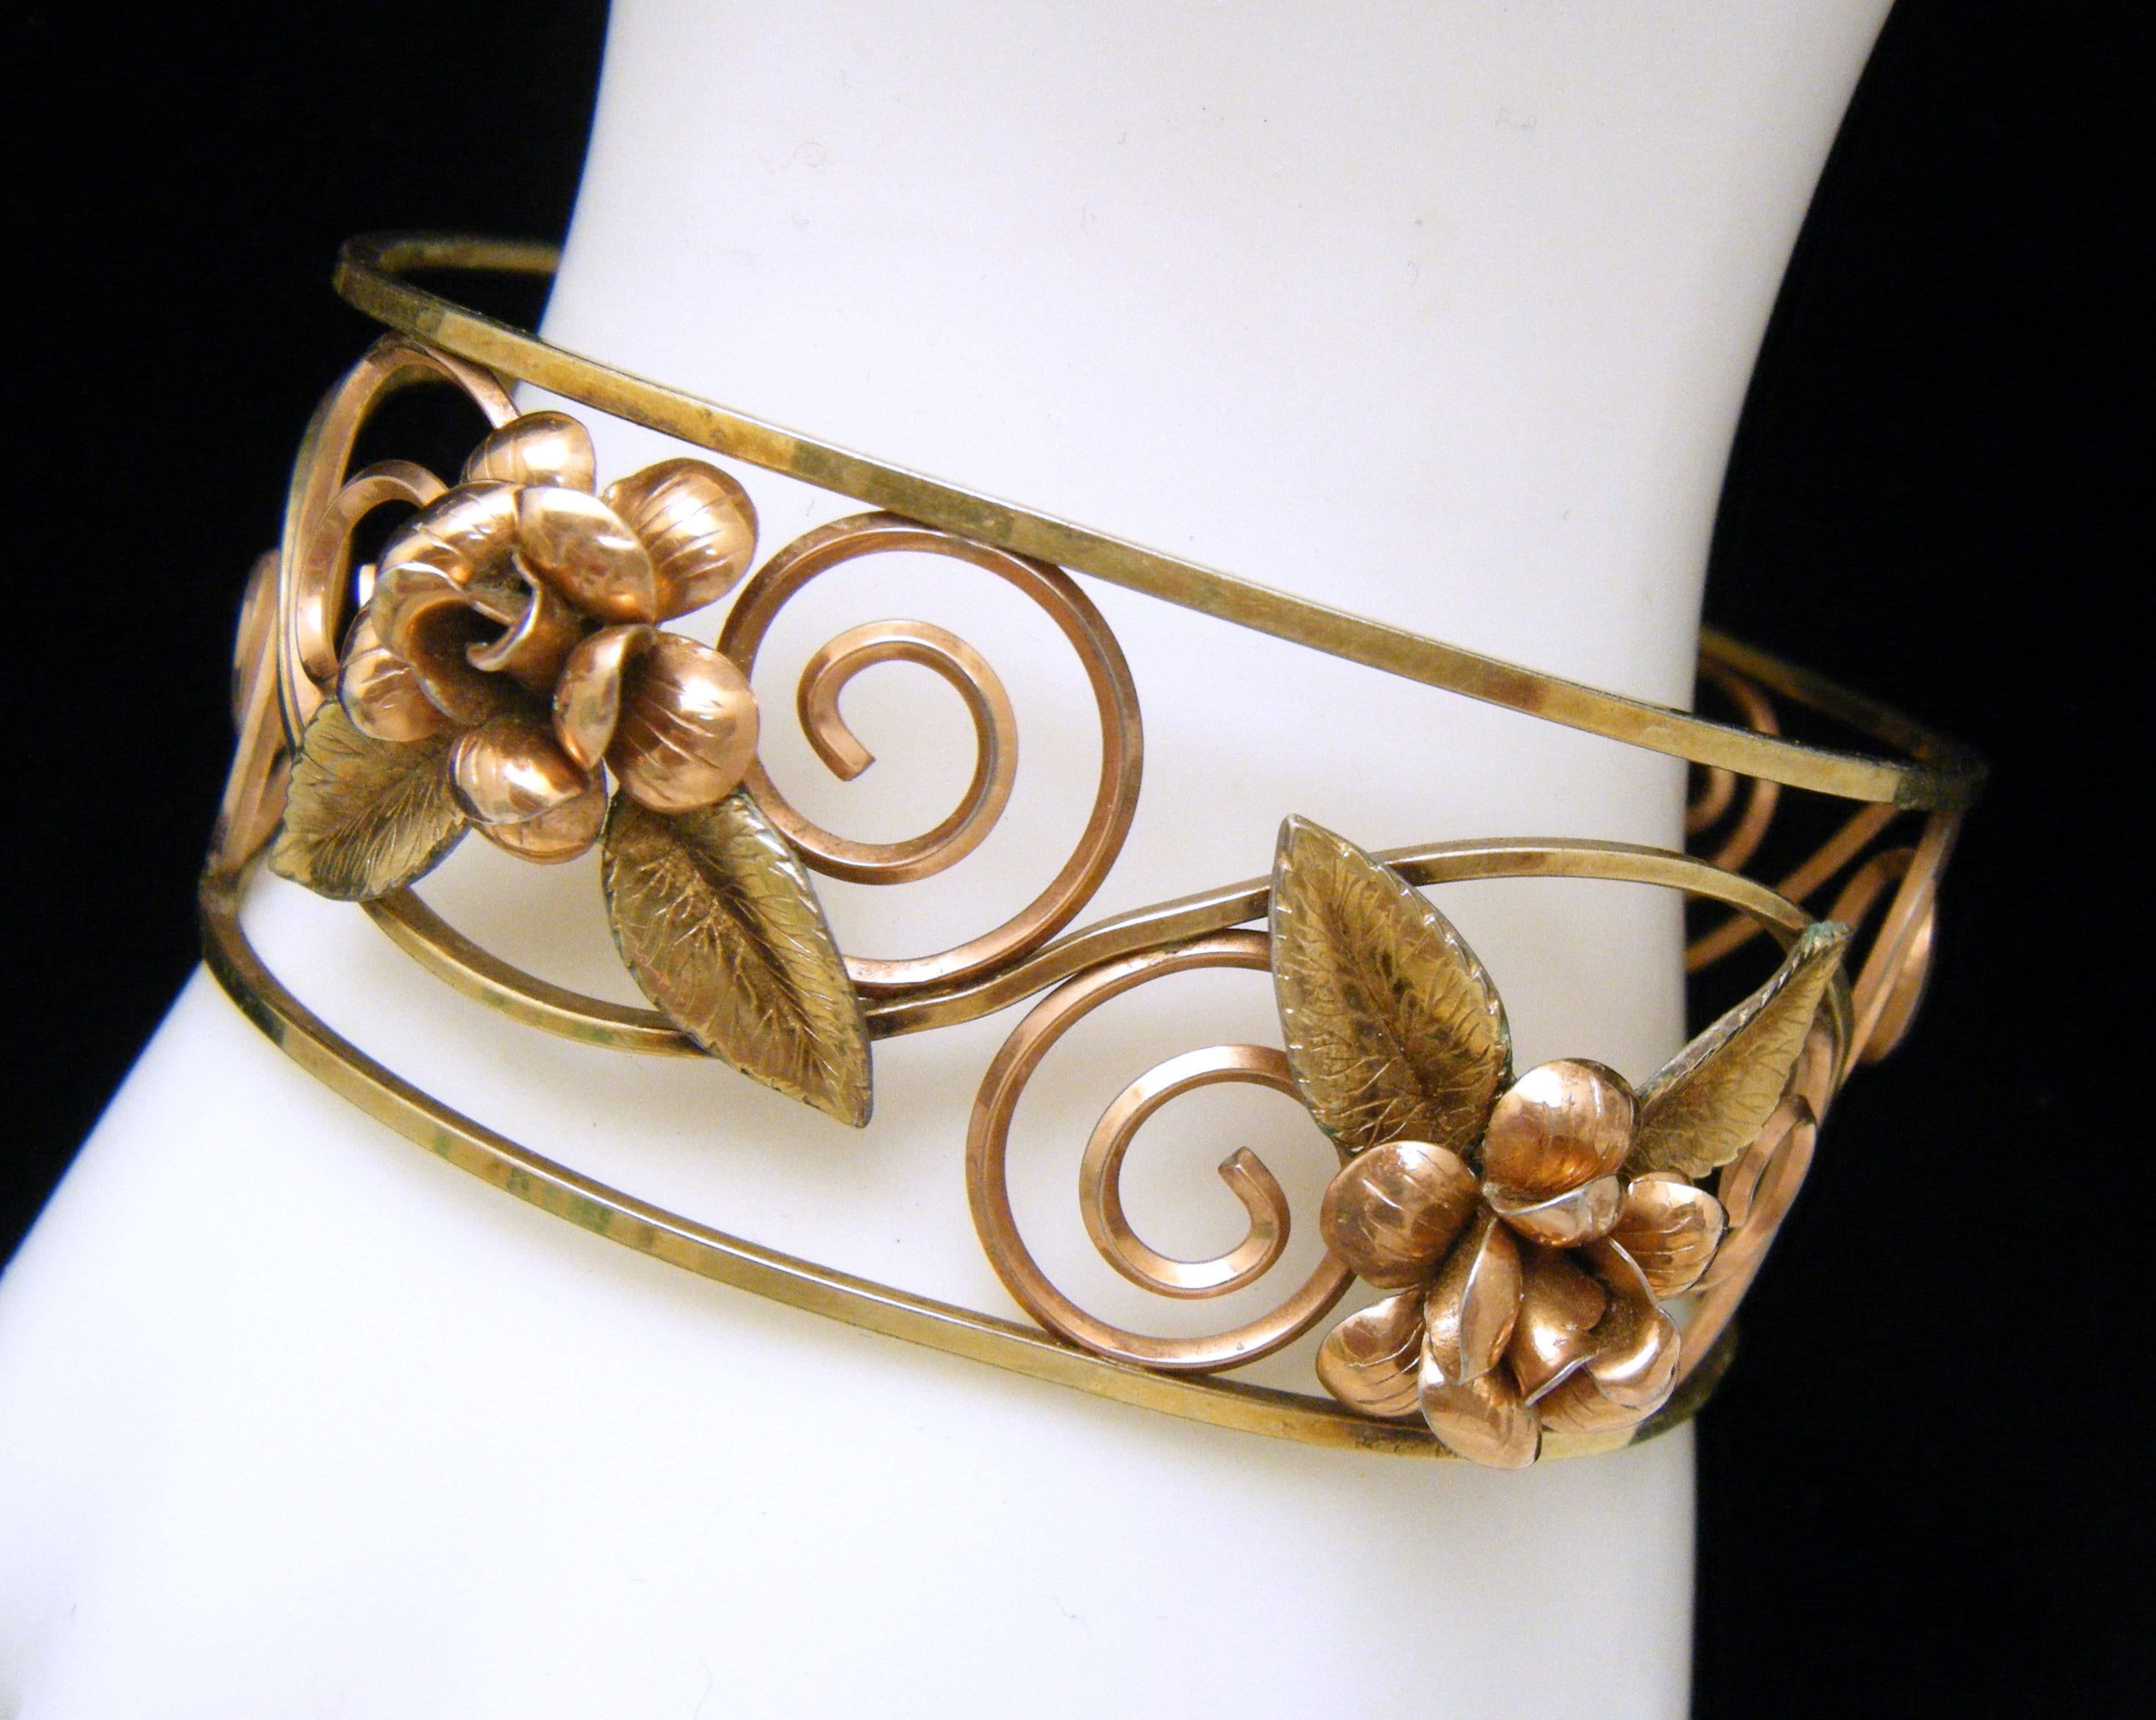 FRED Vintage Gold, Topaz And Enamel Cuff Bracelet Available For